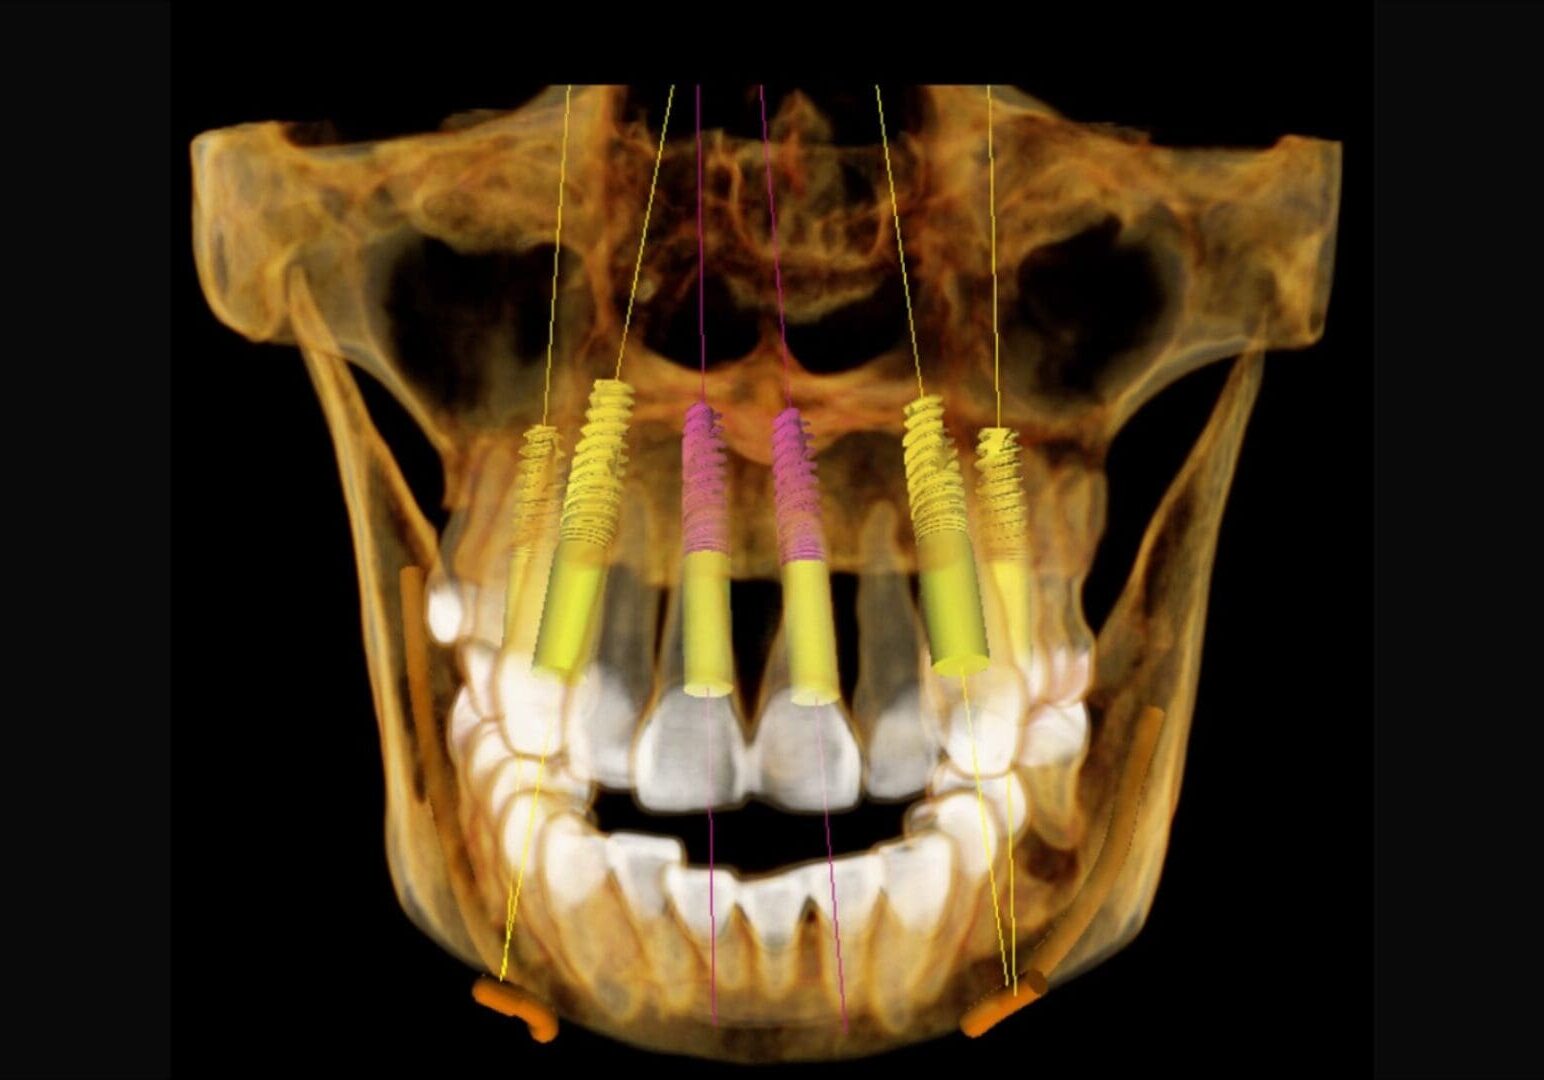 A picture of an x-ray image of teeth with different colors.